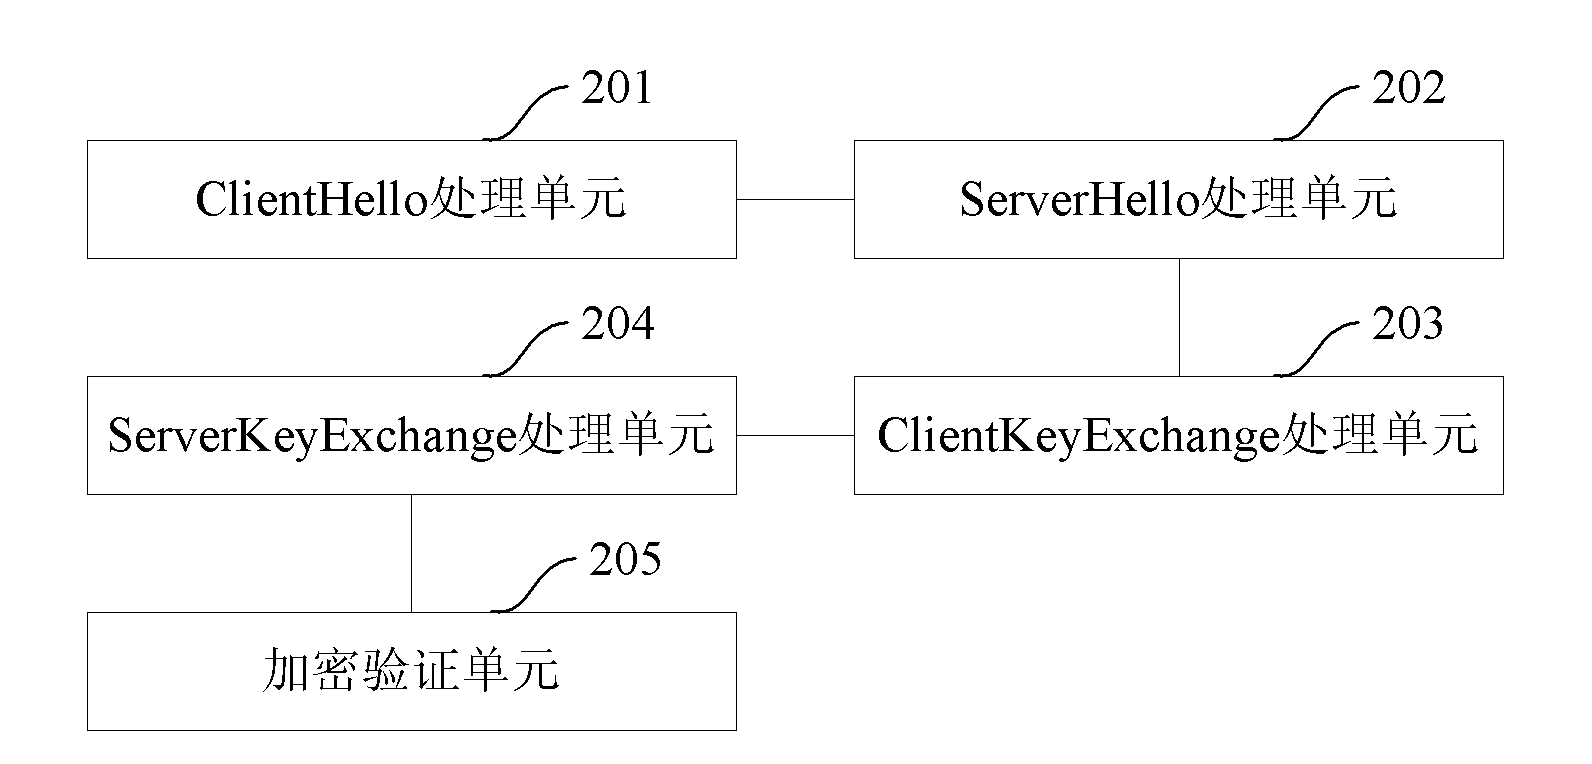 Method for encrypting channels and simplified method and system for encrypting channels based on HTTP (hyper text transport protocol)